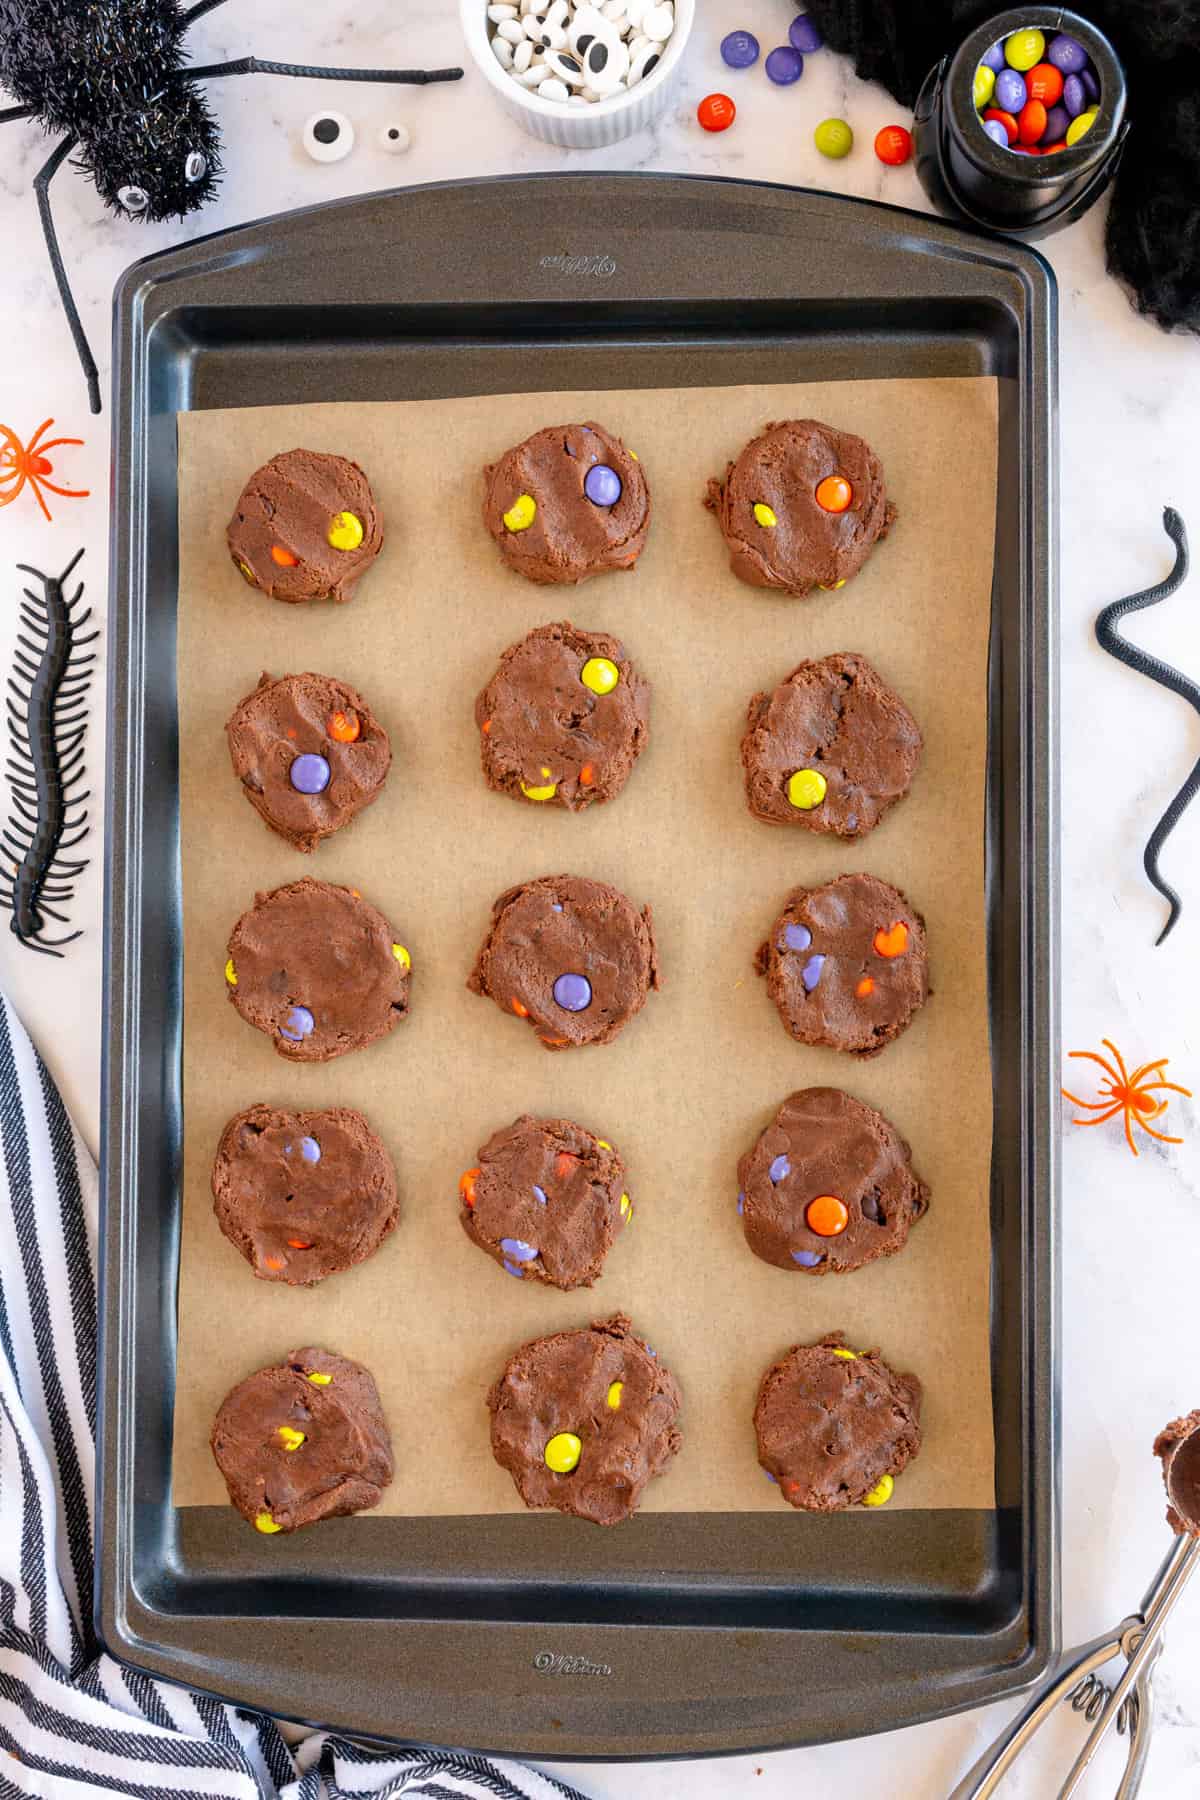 Place parchment paper on baking sheet and place 1 1/2 inch cookie balls throughout the cookie sheet pressing them down to flatten them evenly with your fingers.